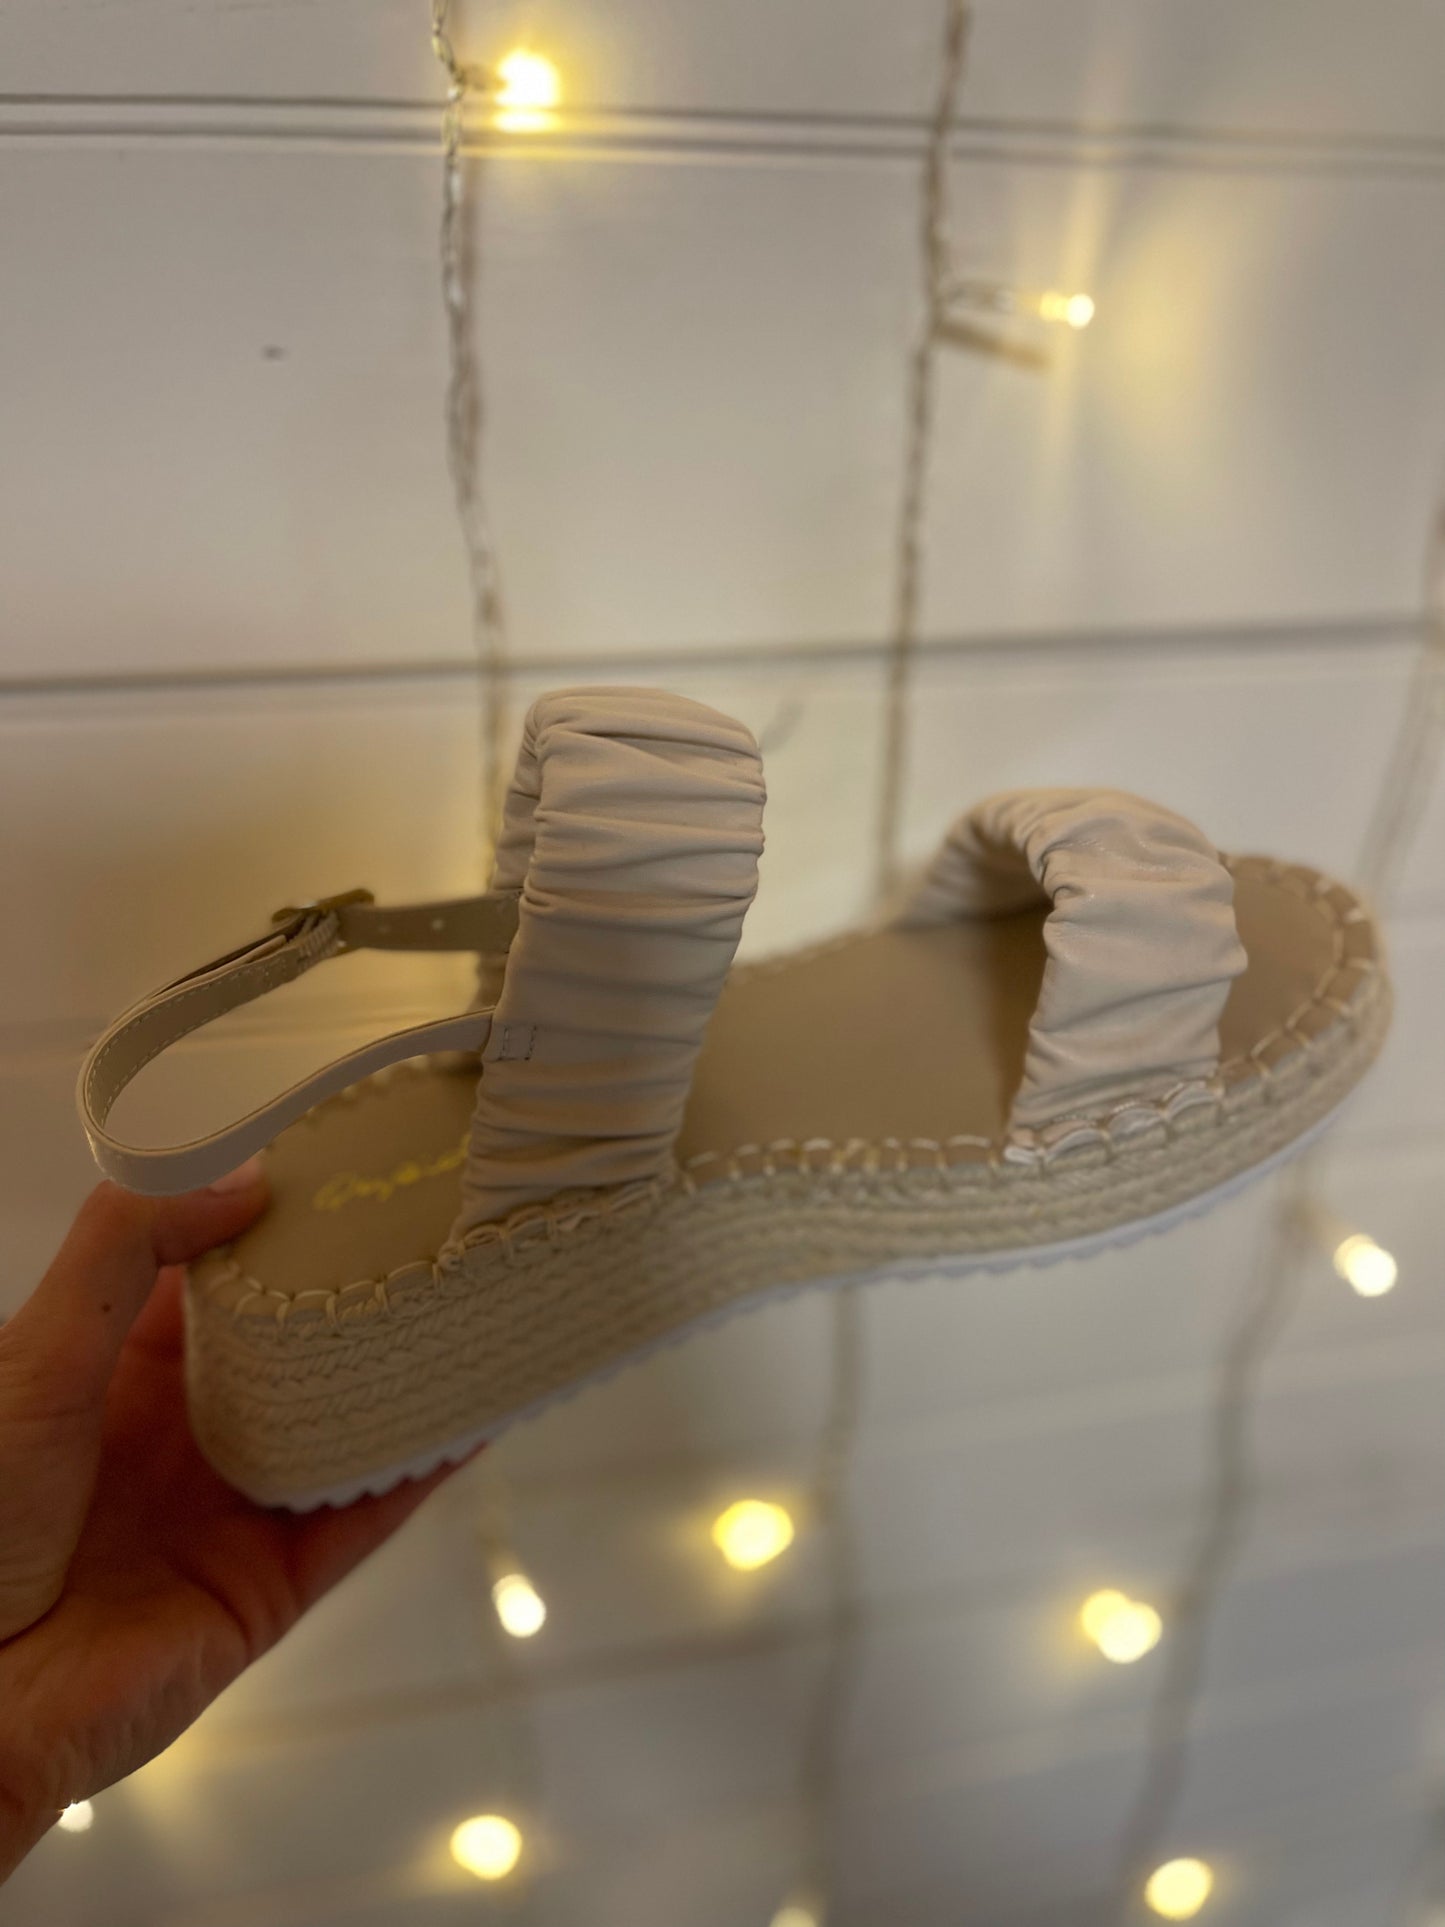 Off White Sandals